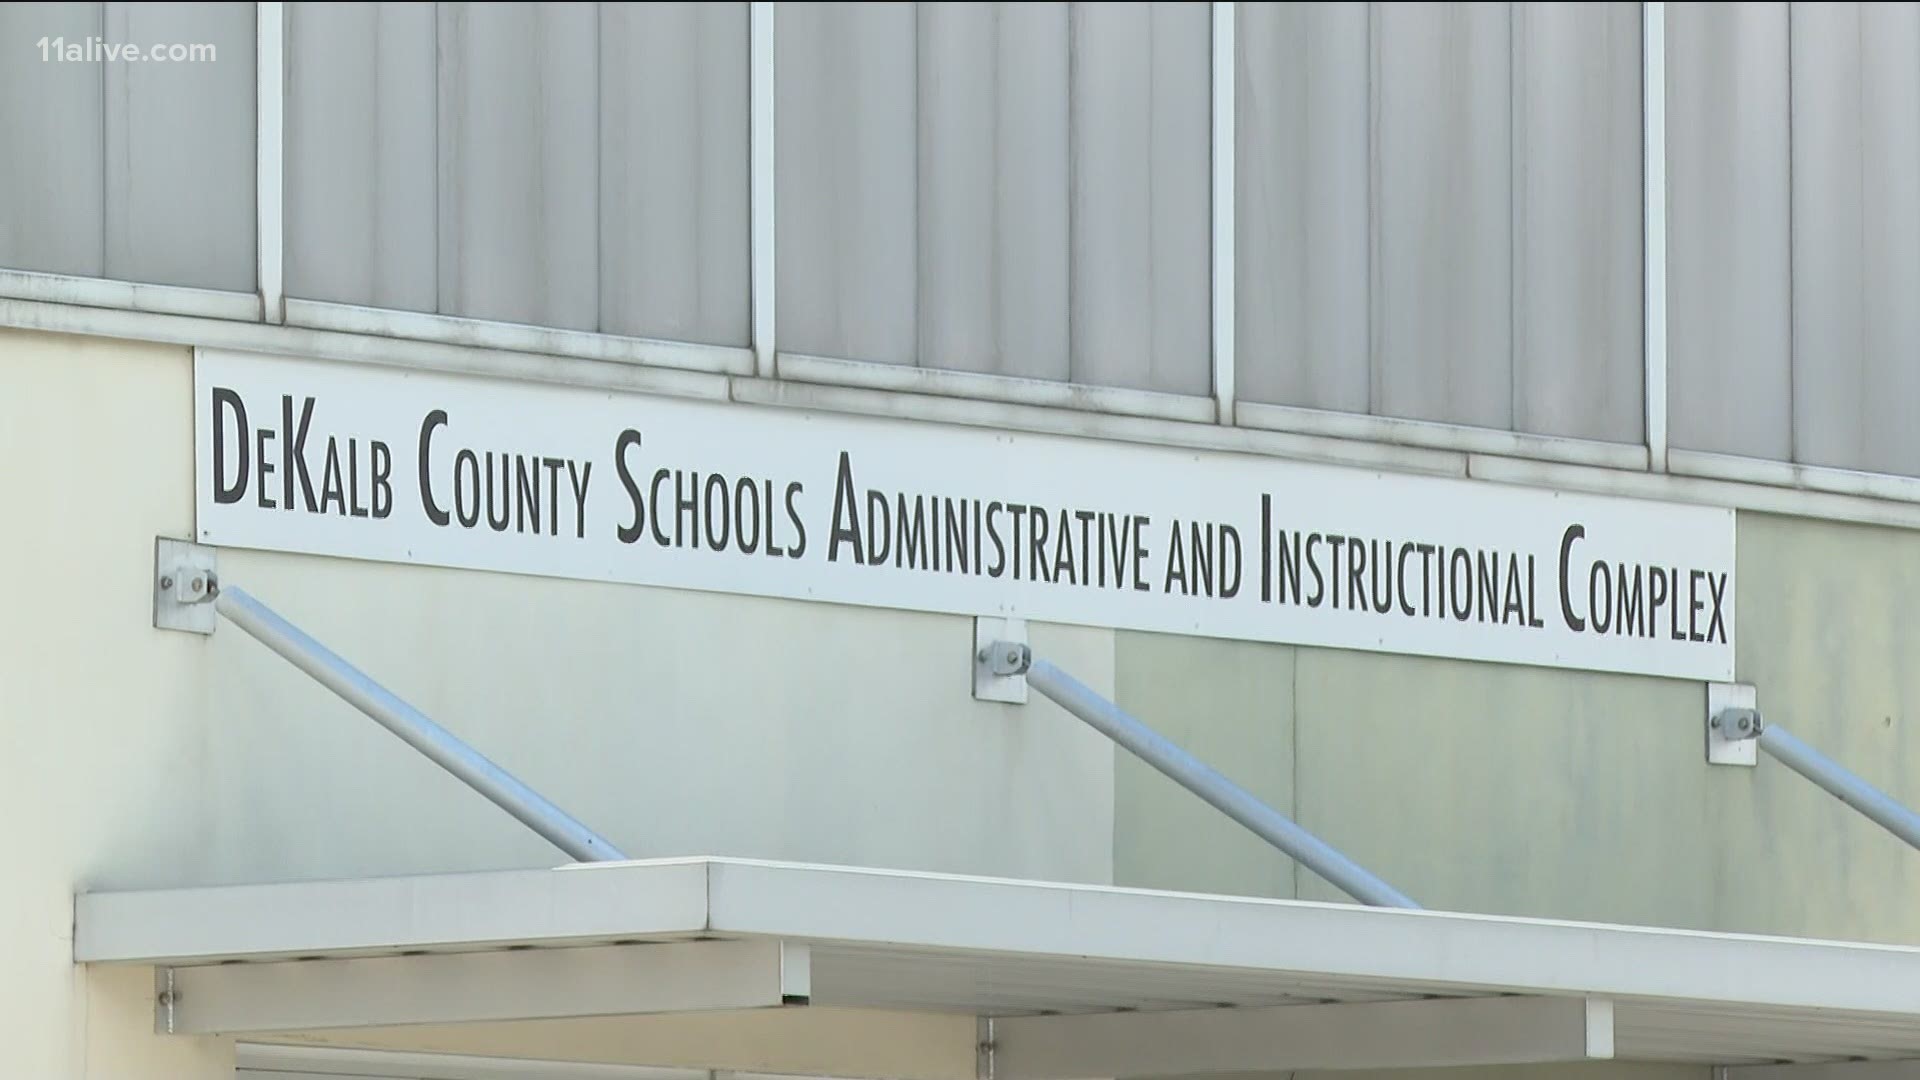 While children under 12 still aren't eligible for the COVID-19 vaccine, that's not stopping DeKalb County Schools from dropping its mask mandate